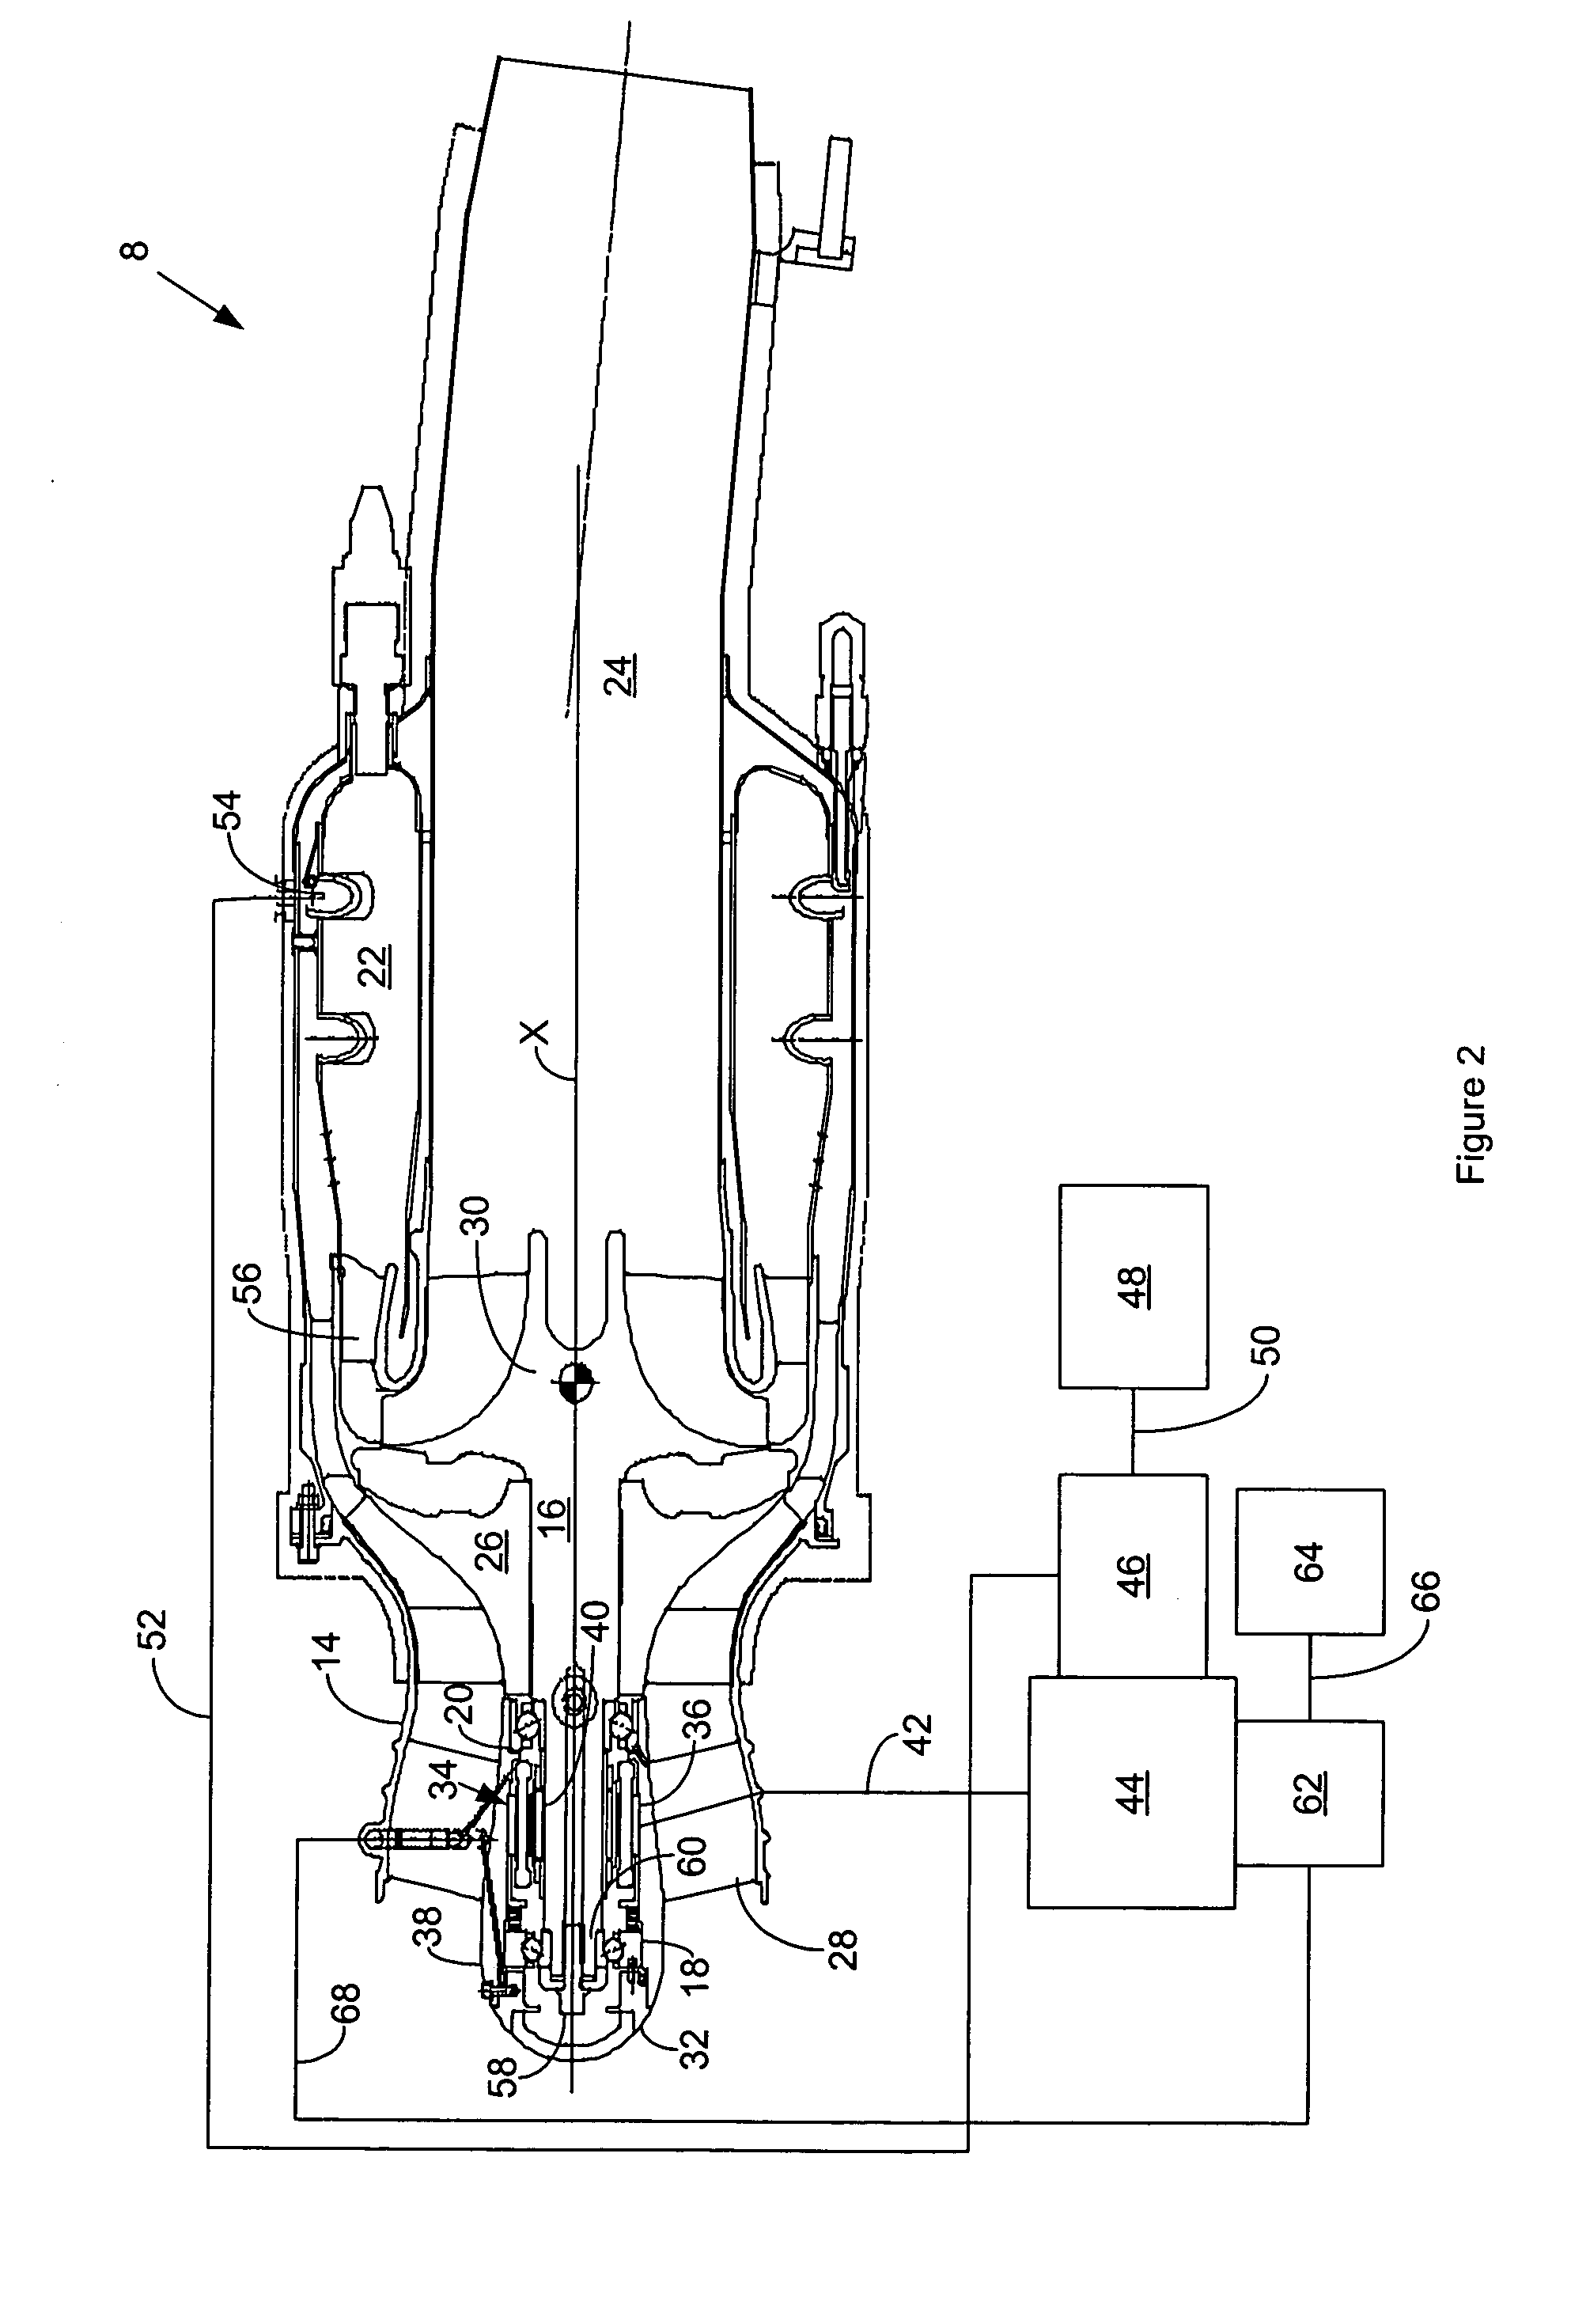 Compact recirculating lubrication system for a miniature gas turbine engine